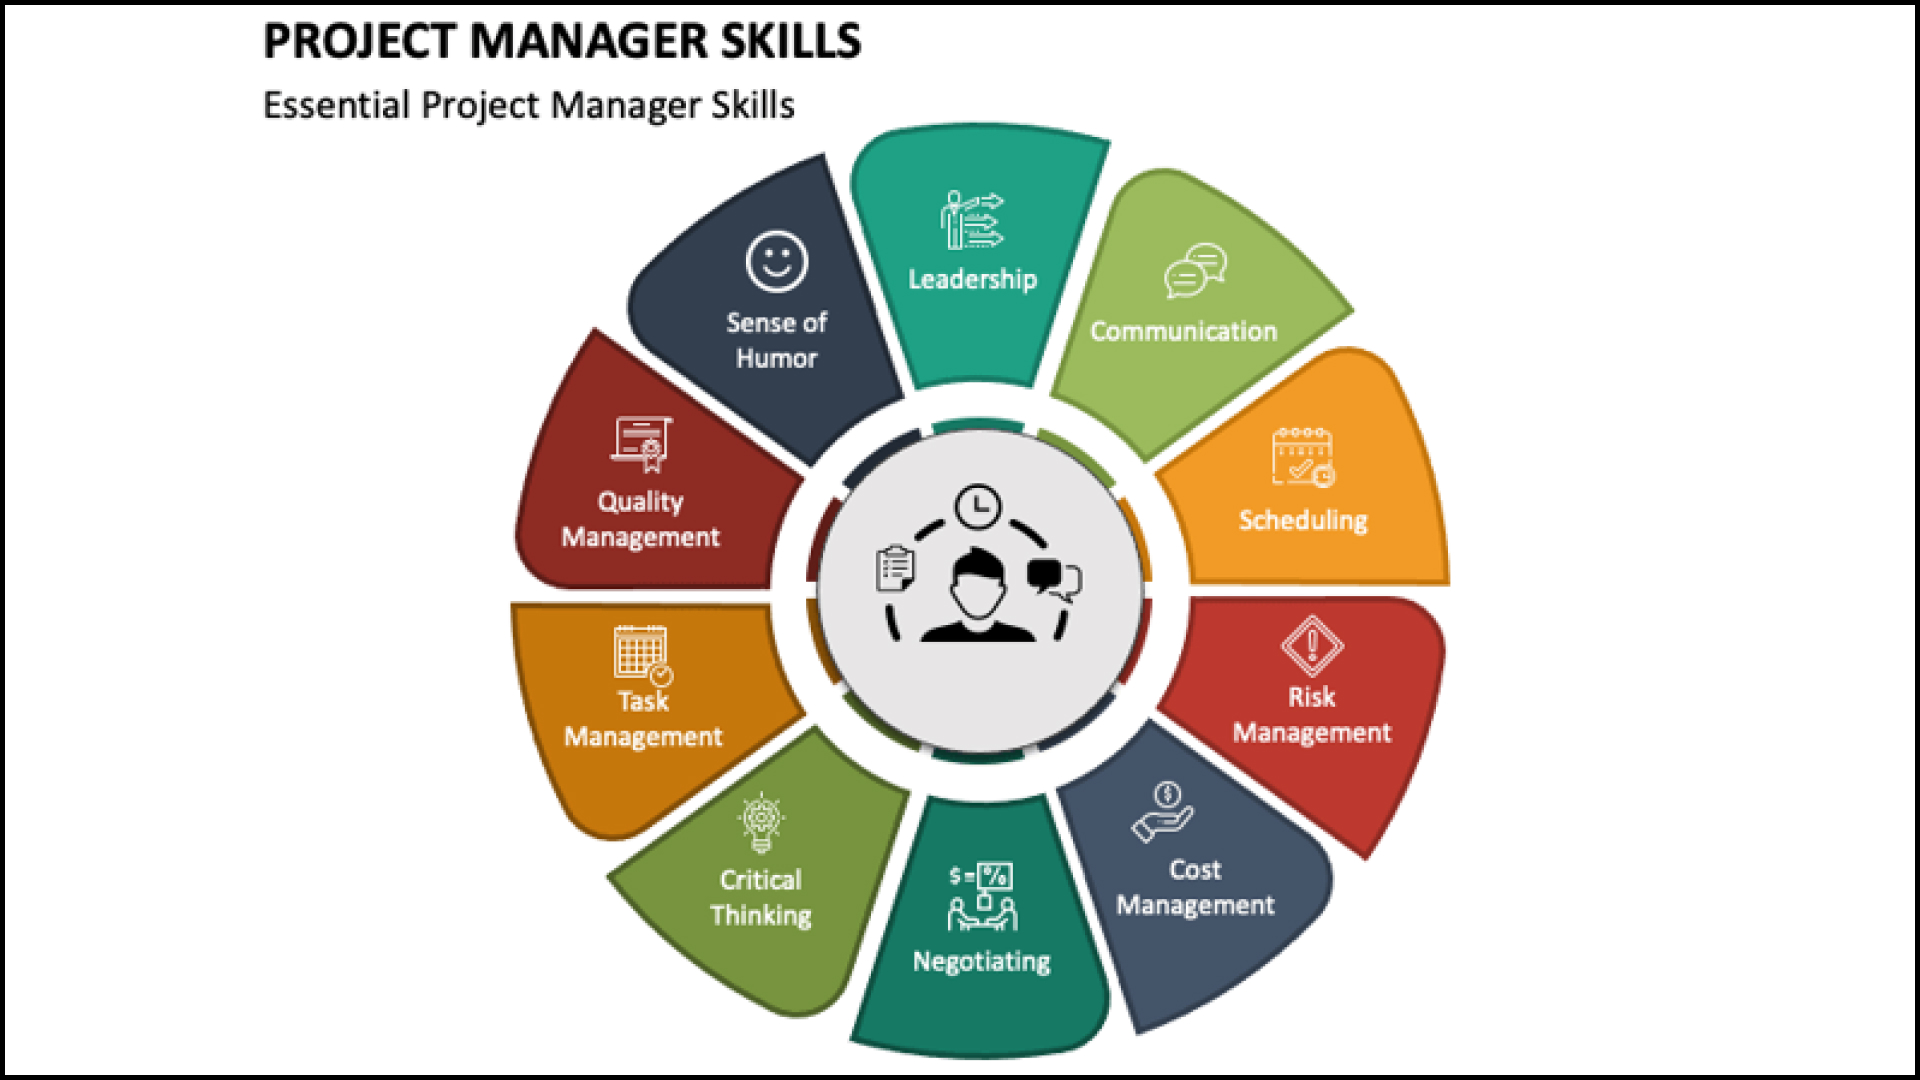 A table showing the list of required skill set for project managers